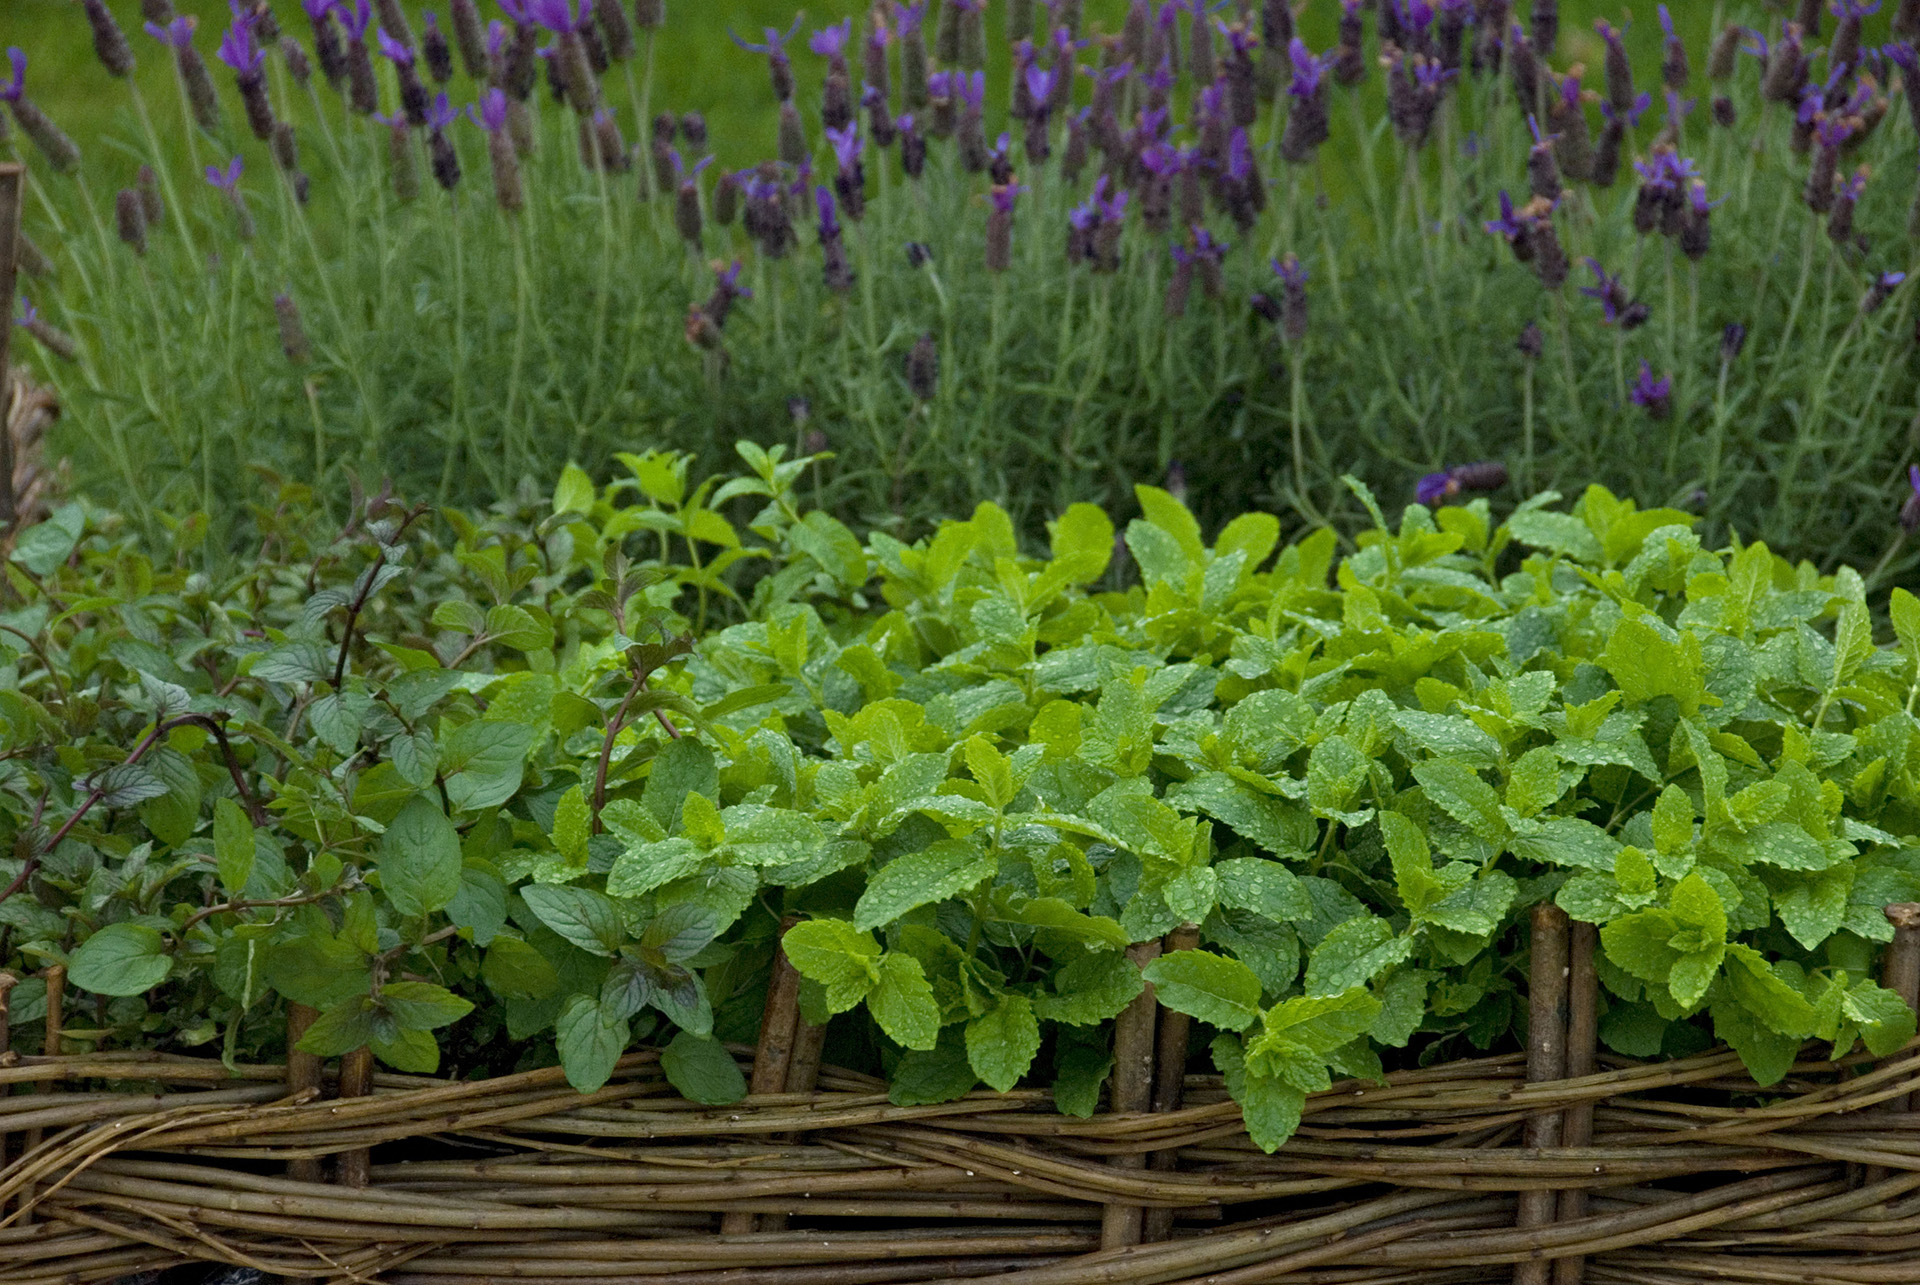 How to Plant and Grow Mint